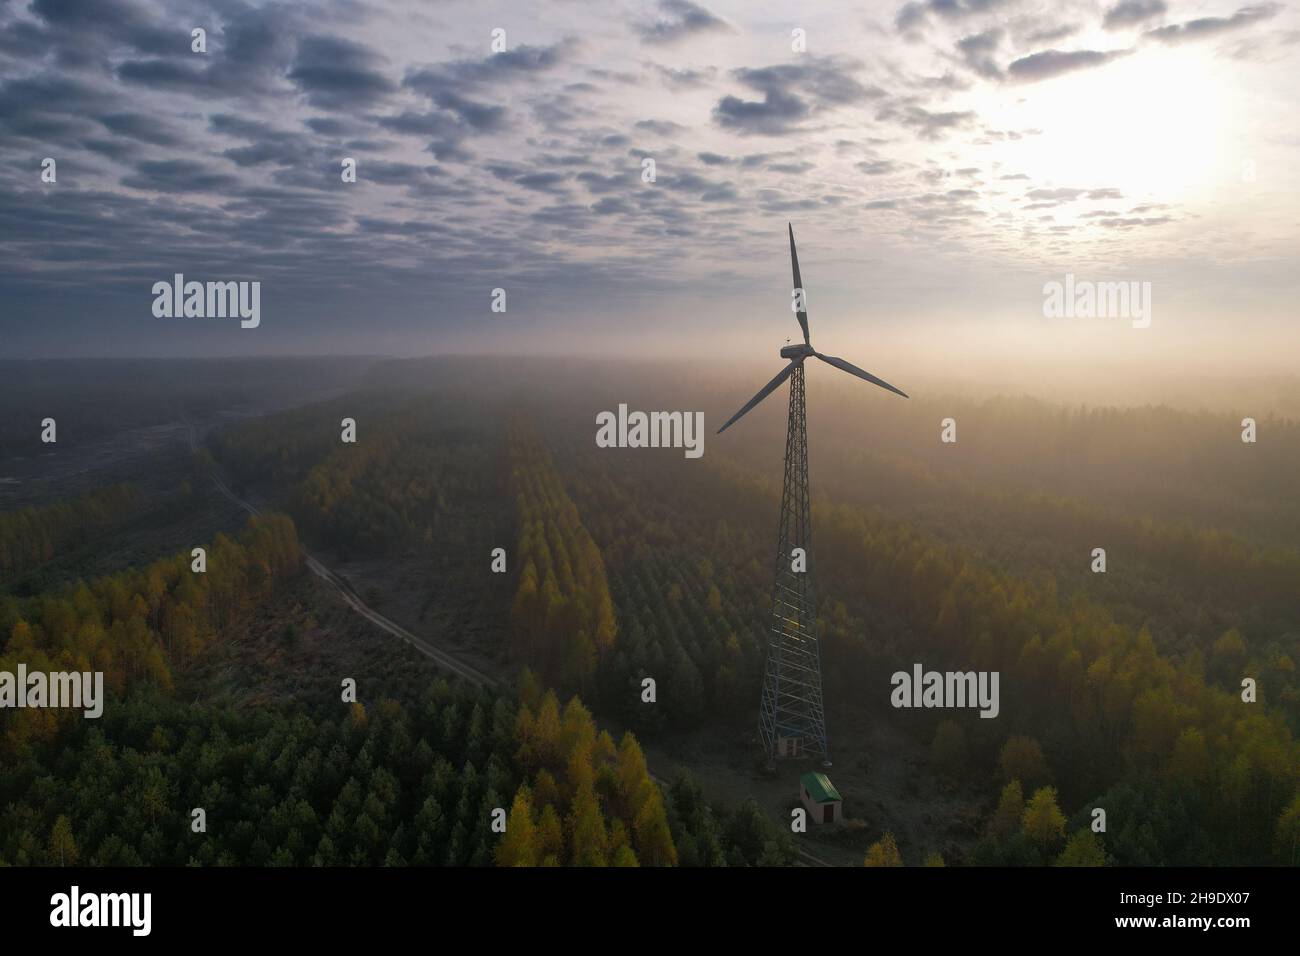 Wind turbine with a fixed propeller in the countryside. Stock Photo